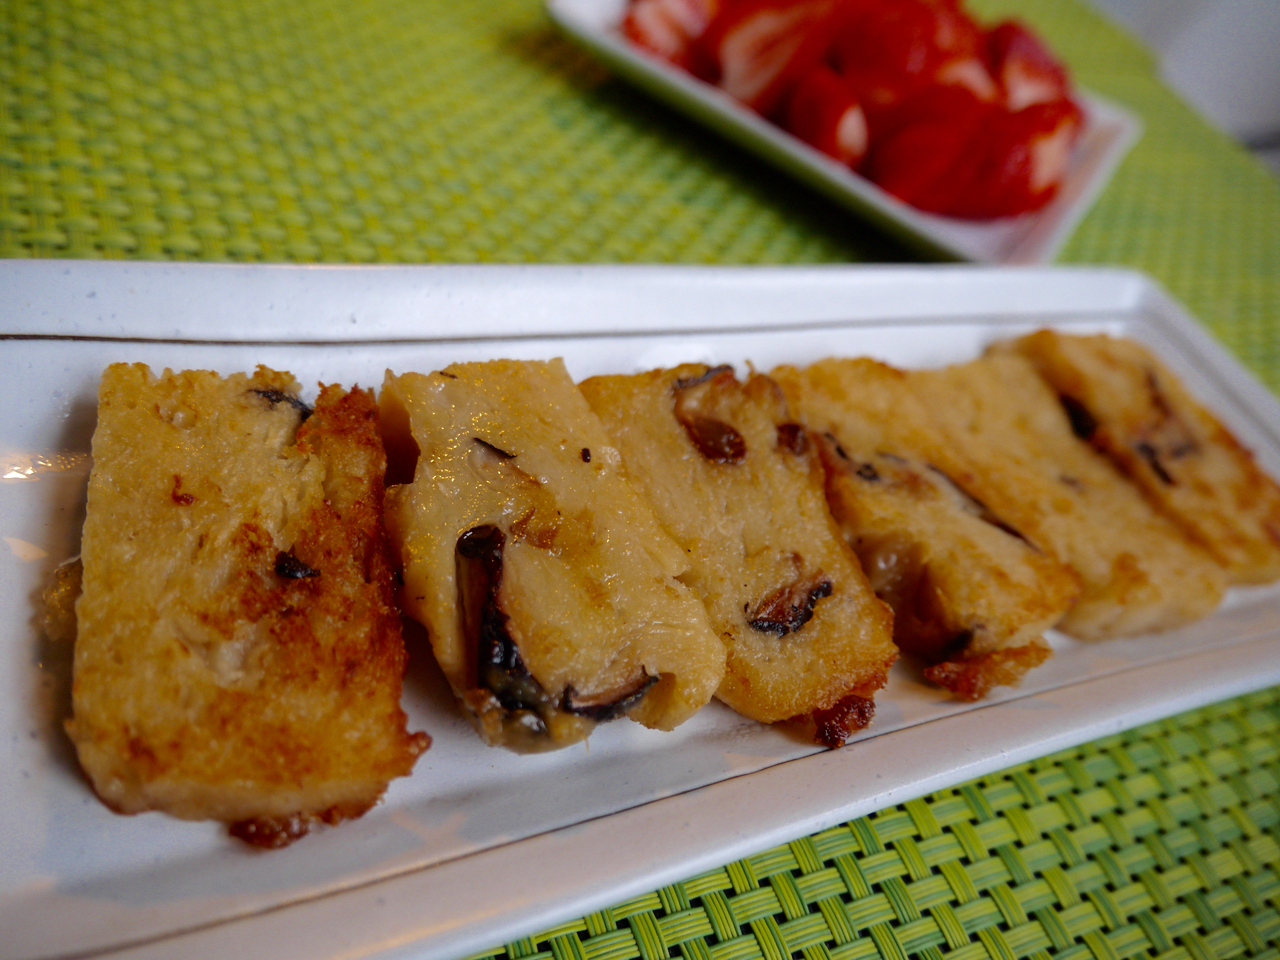 
The practice of element turnip cake, how is element turnip cake done delicious